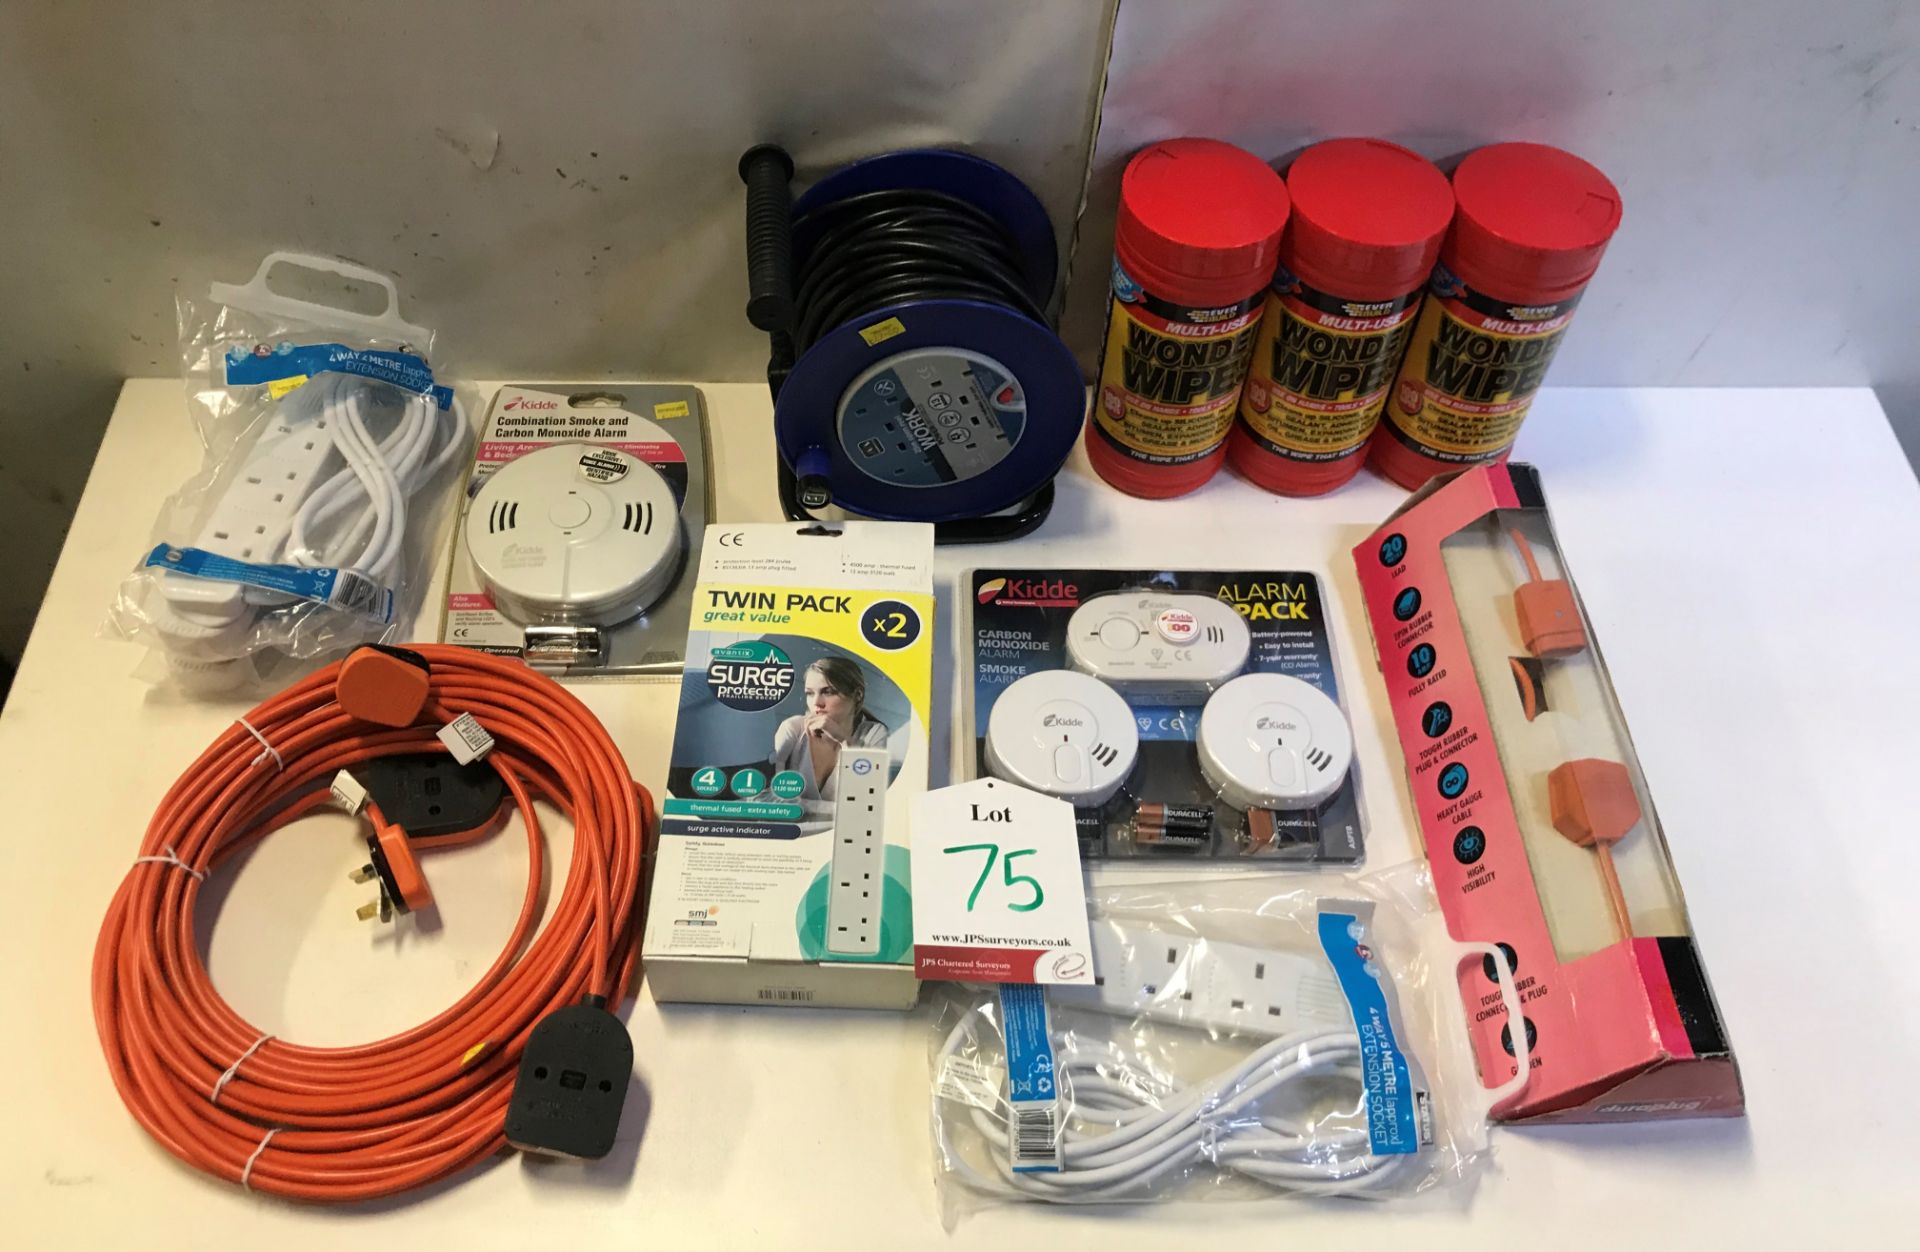 Quantity of Fire Alarms, Multi-purpose wipes & Extension leads as per photos